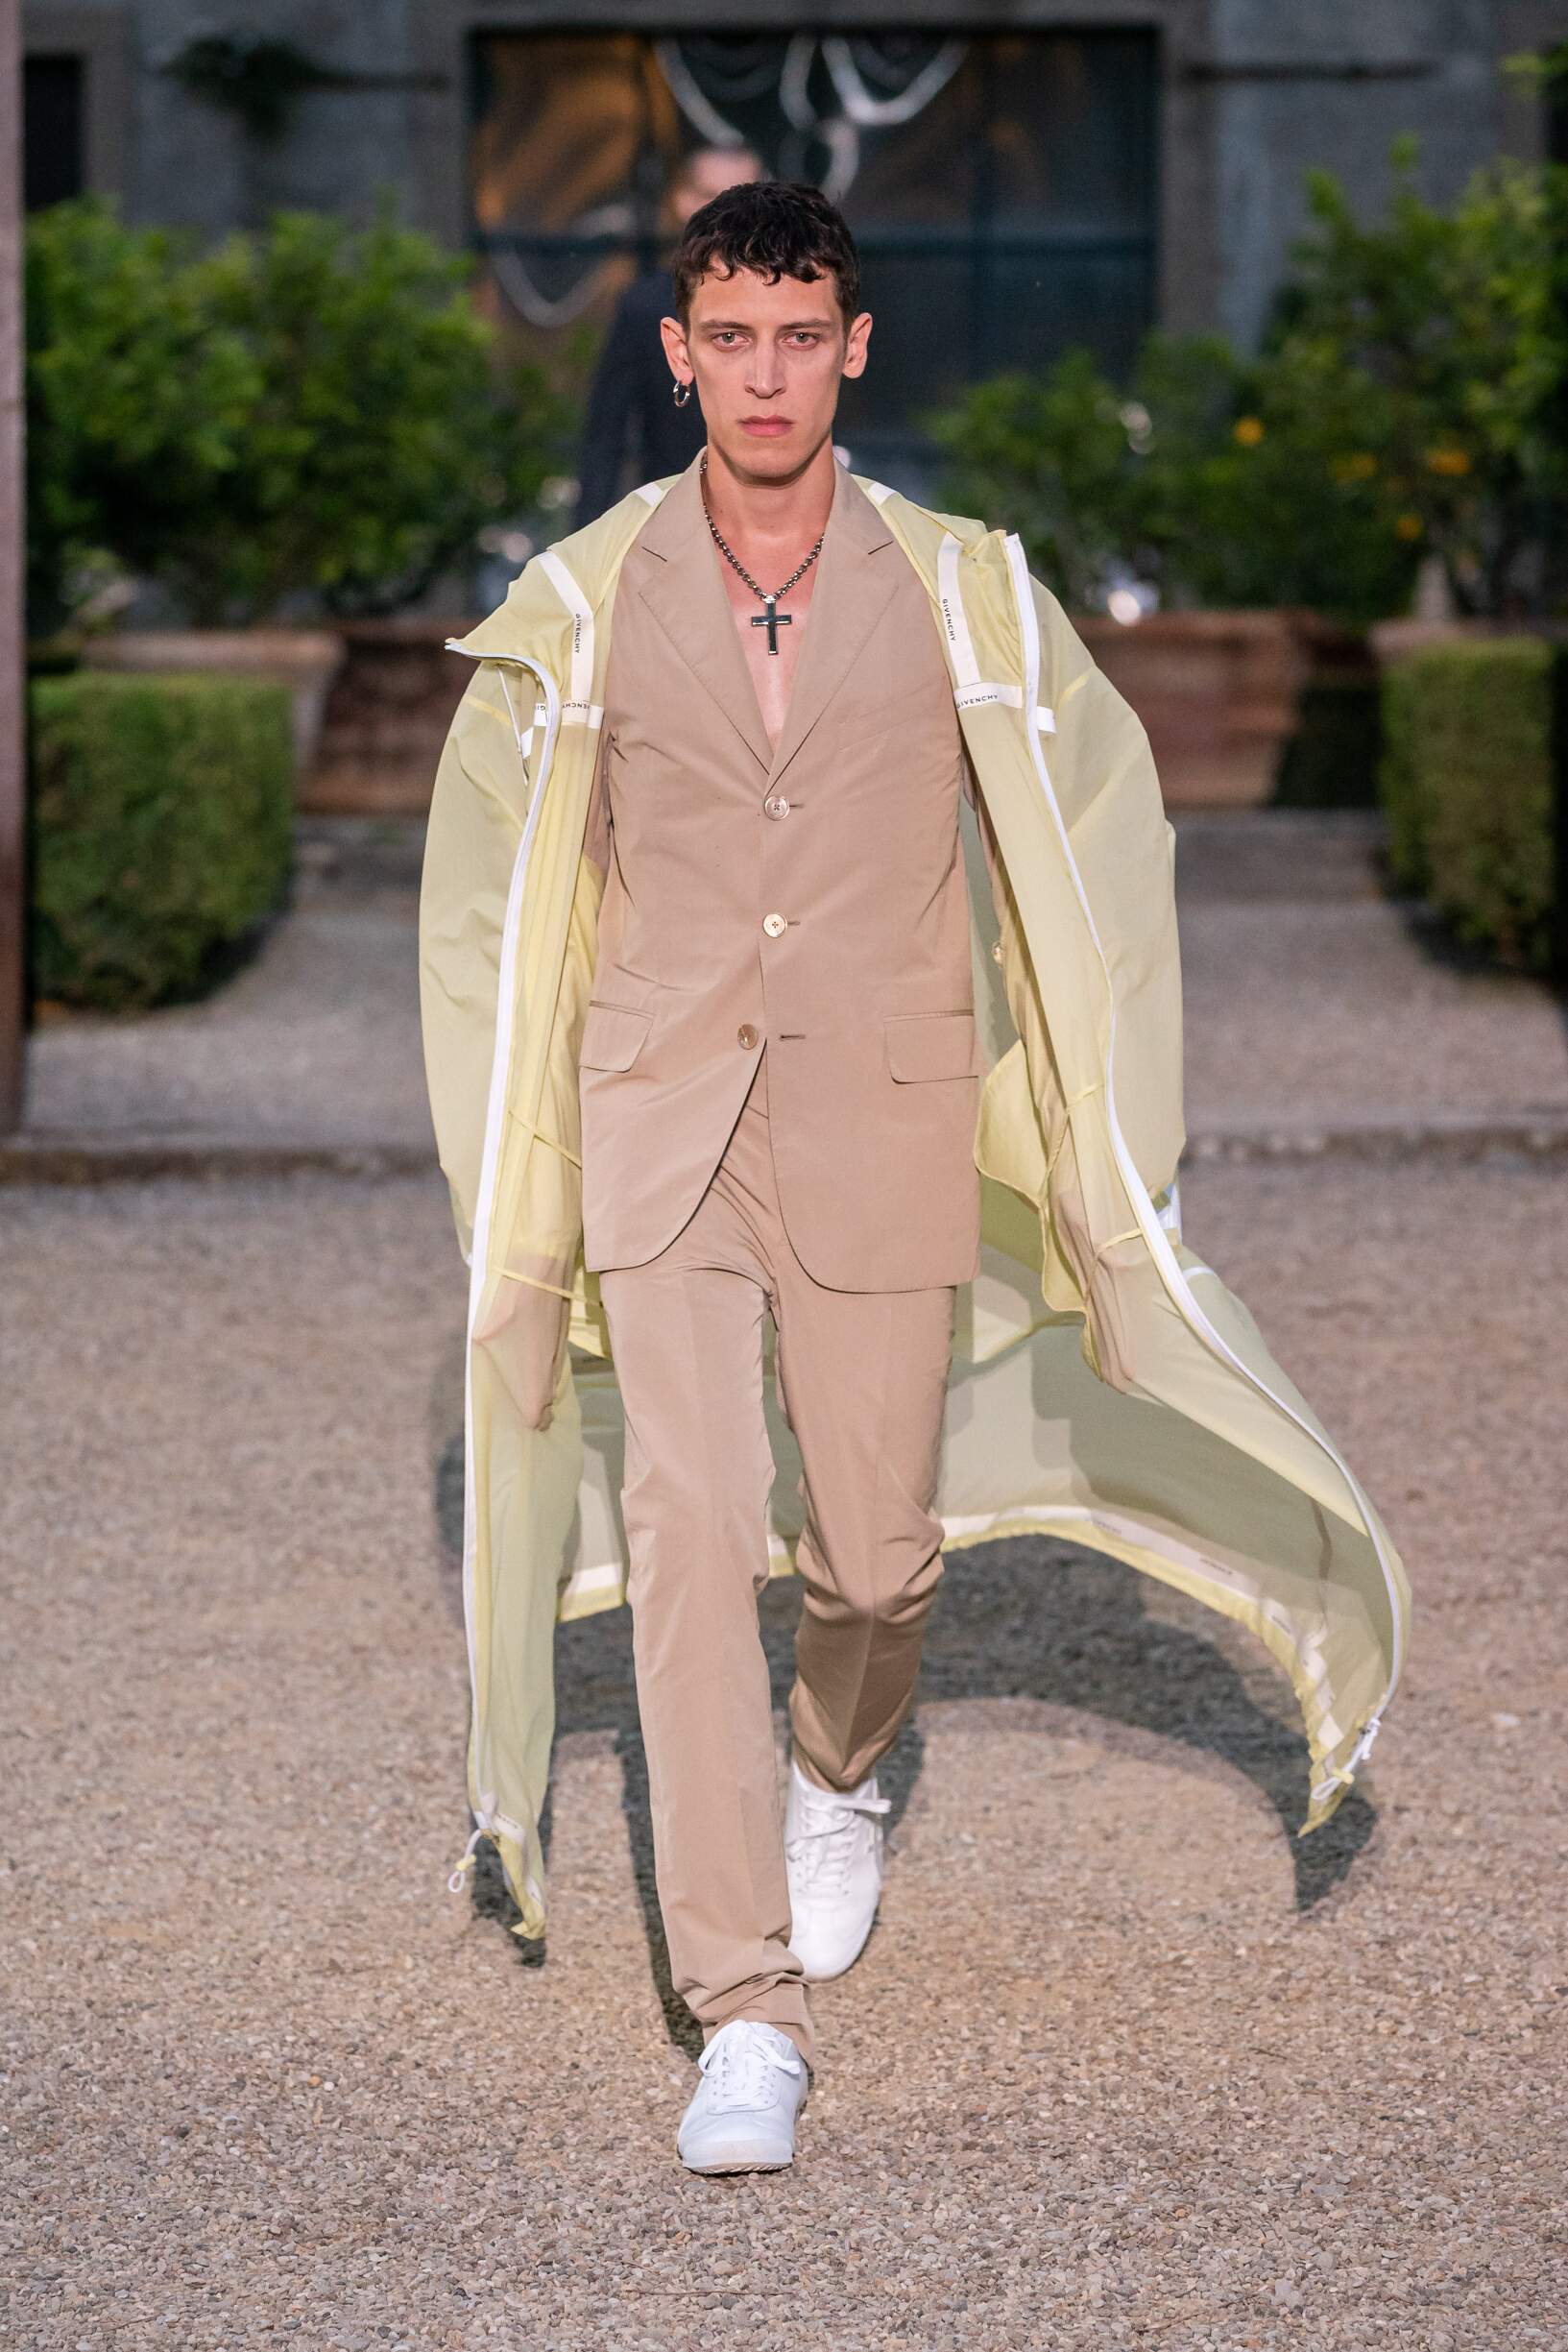 Givenchy Menswear Collection Trends